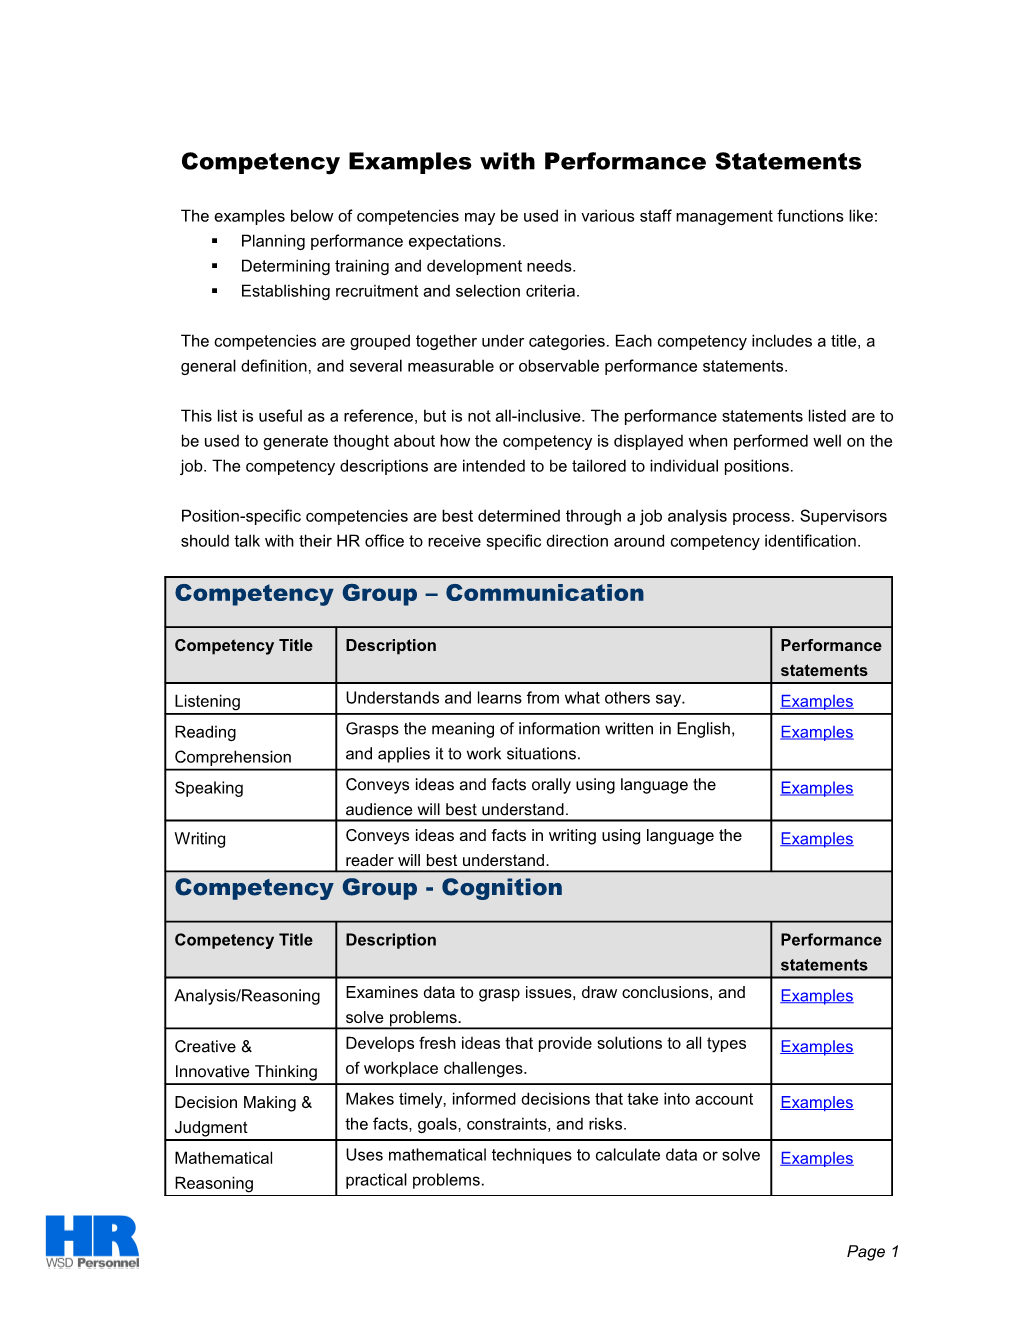 Competency Examples with Performance Statements